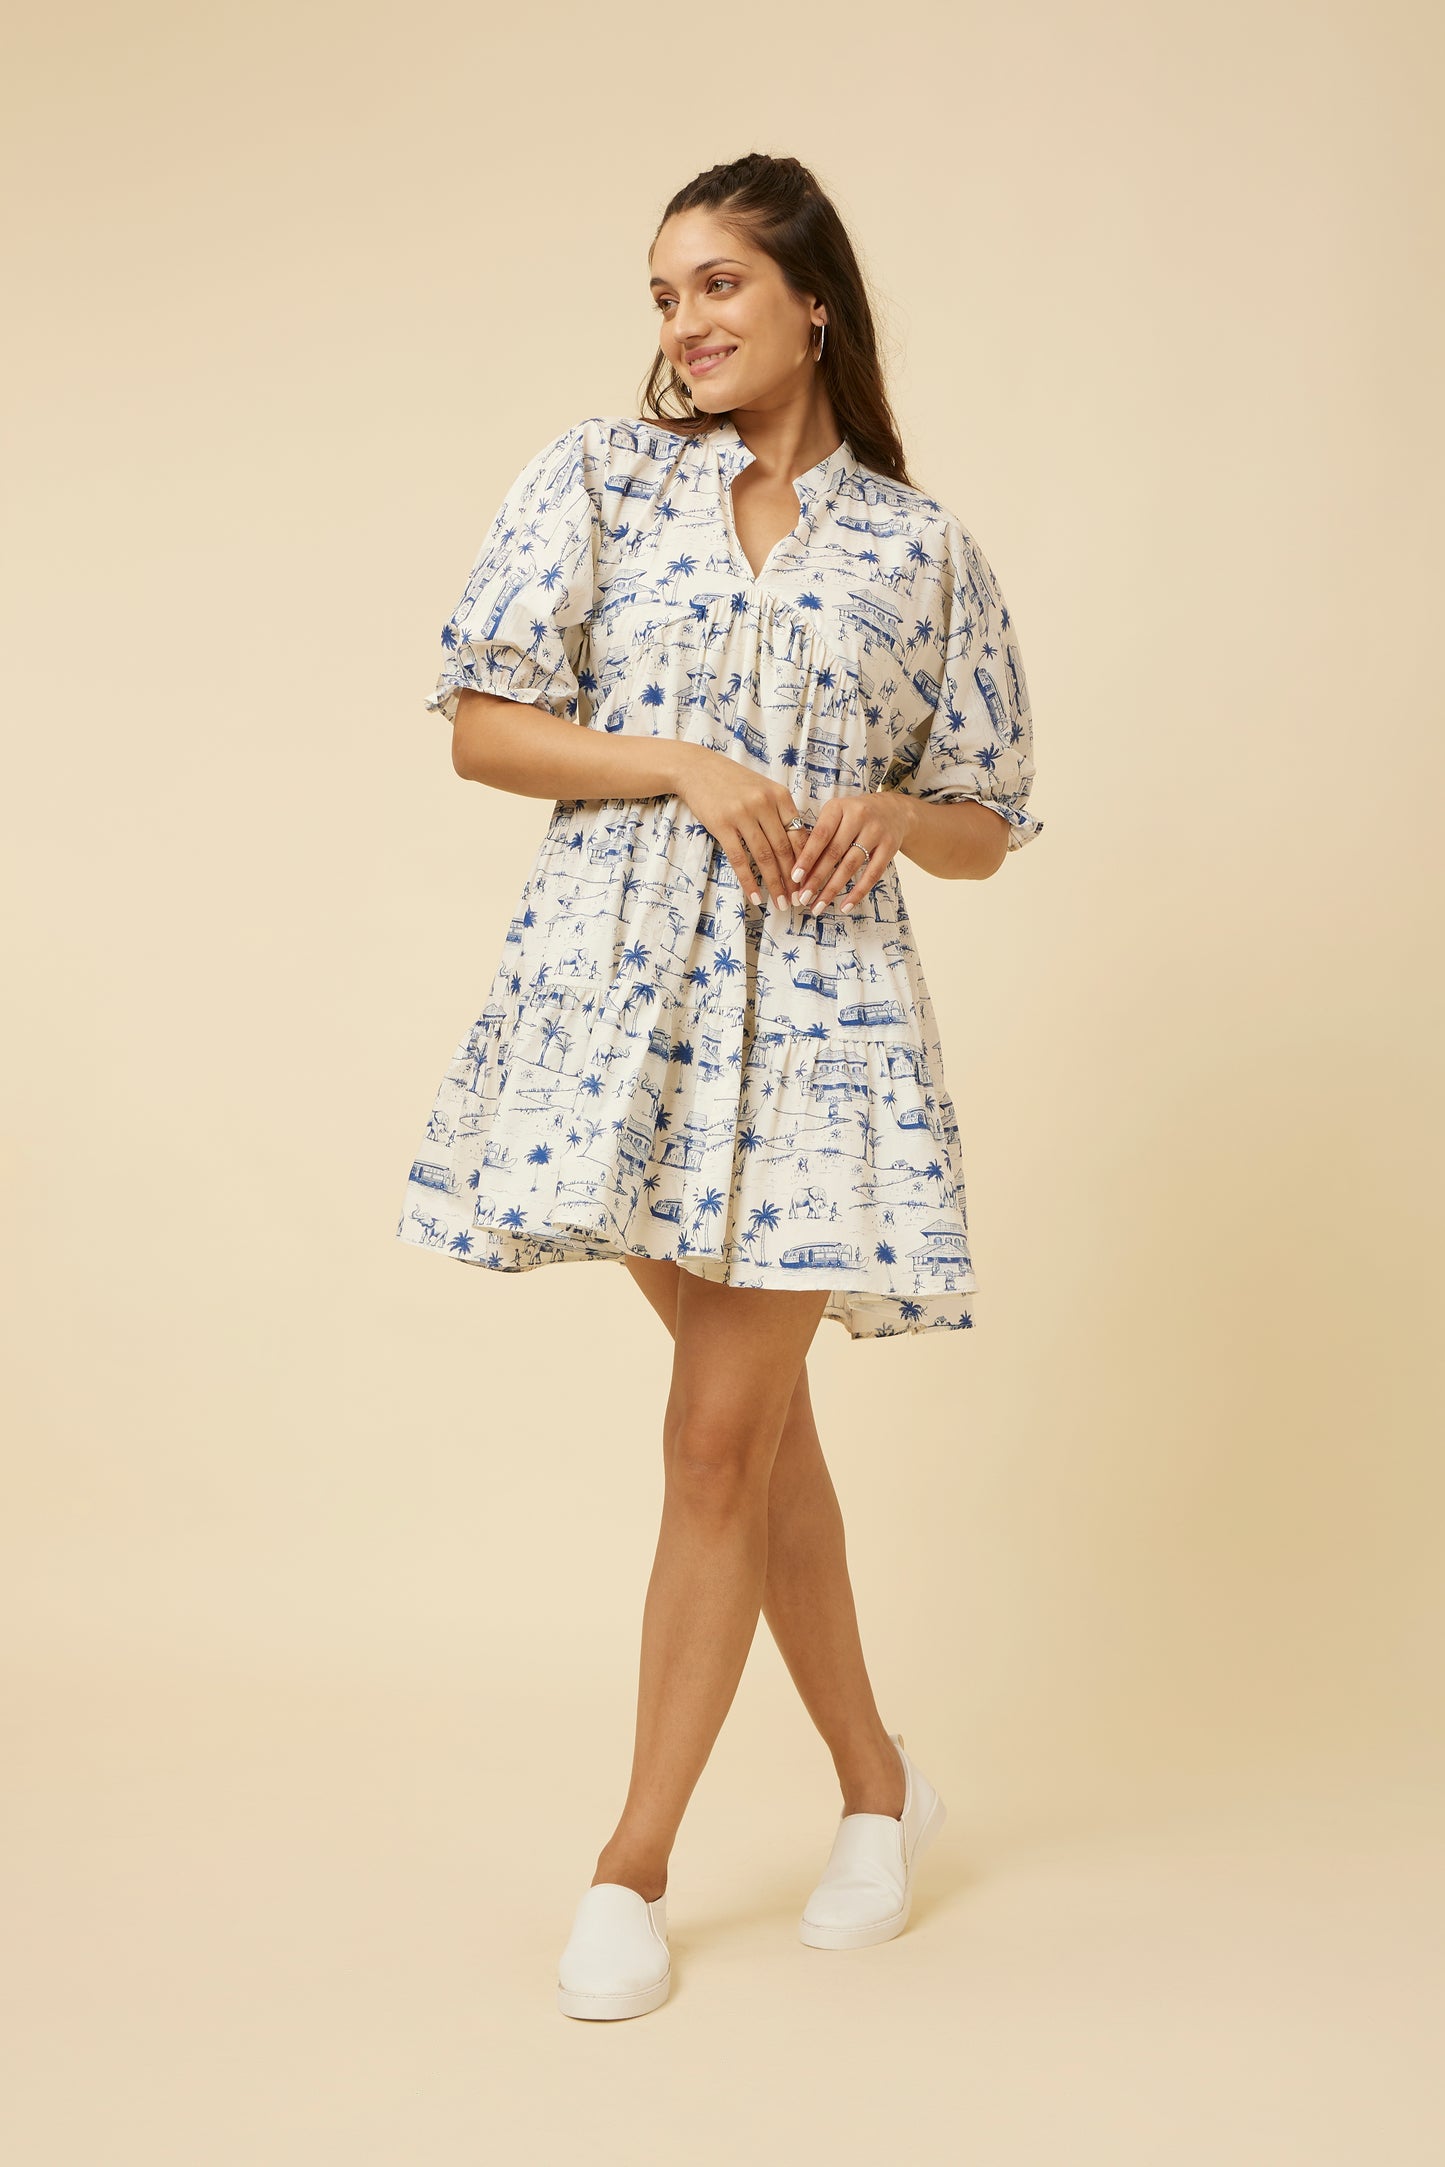 Model poses in the Homeland Dress, highlighting its whimsical print and tiered structure, complete with a comfortable yoke collar and casual footwear